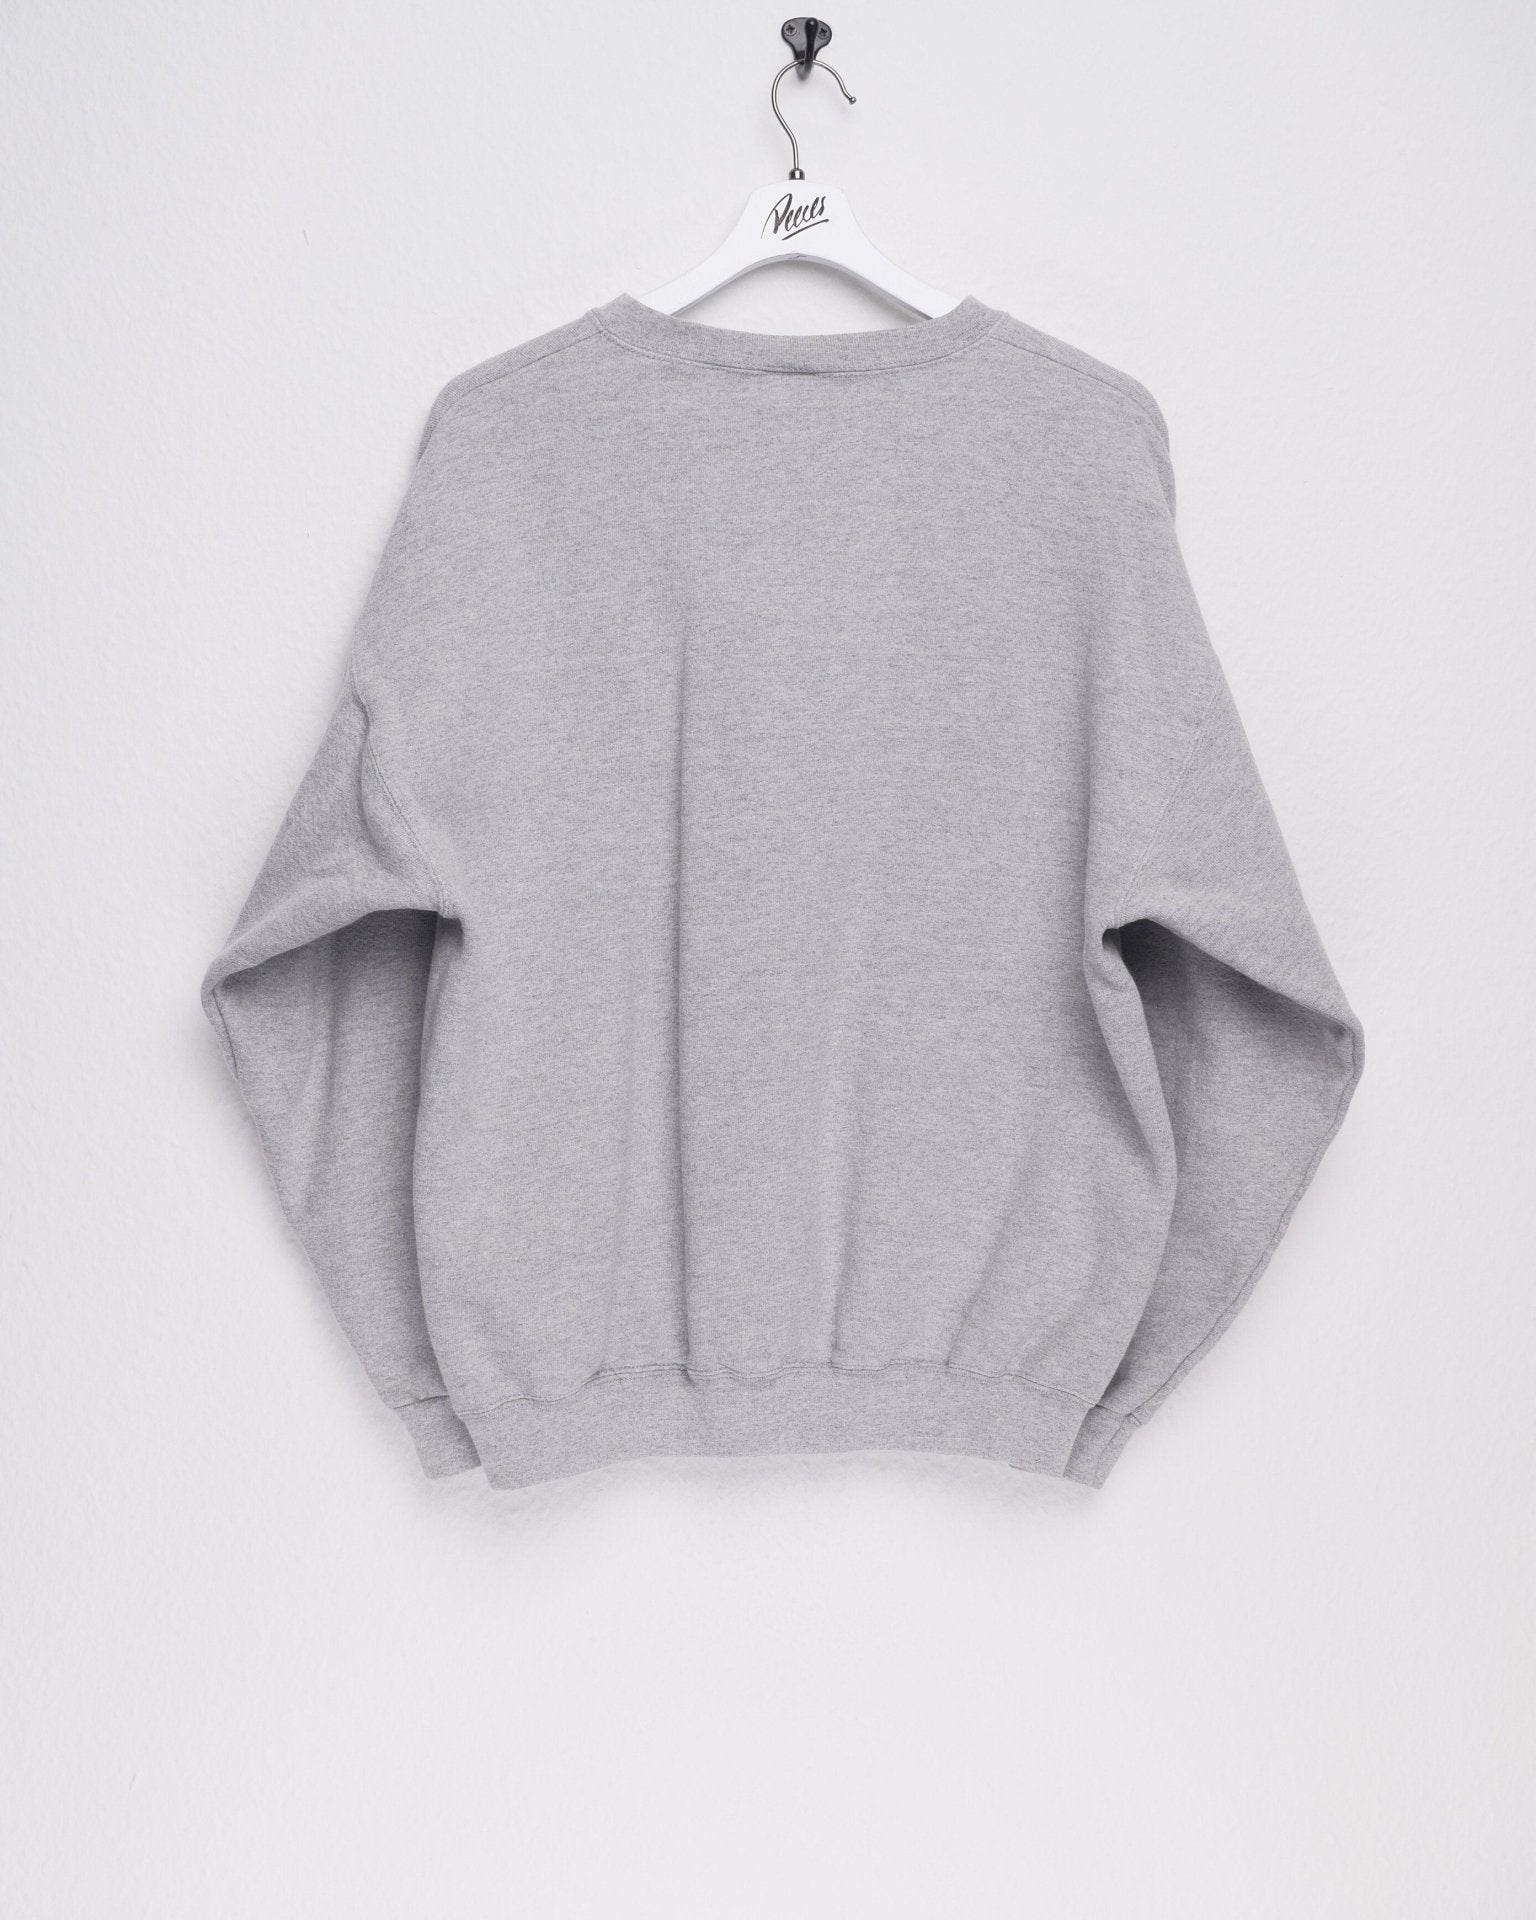 lee 'Property of Number One' printed Graphic grey Sweater - Peeces